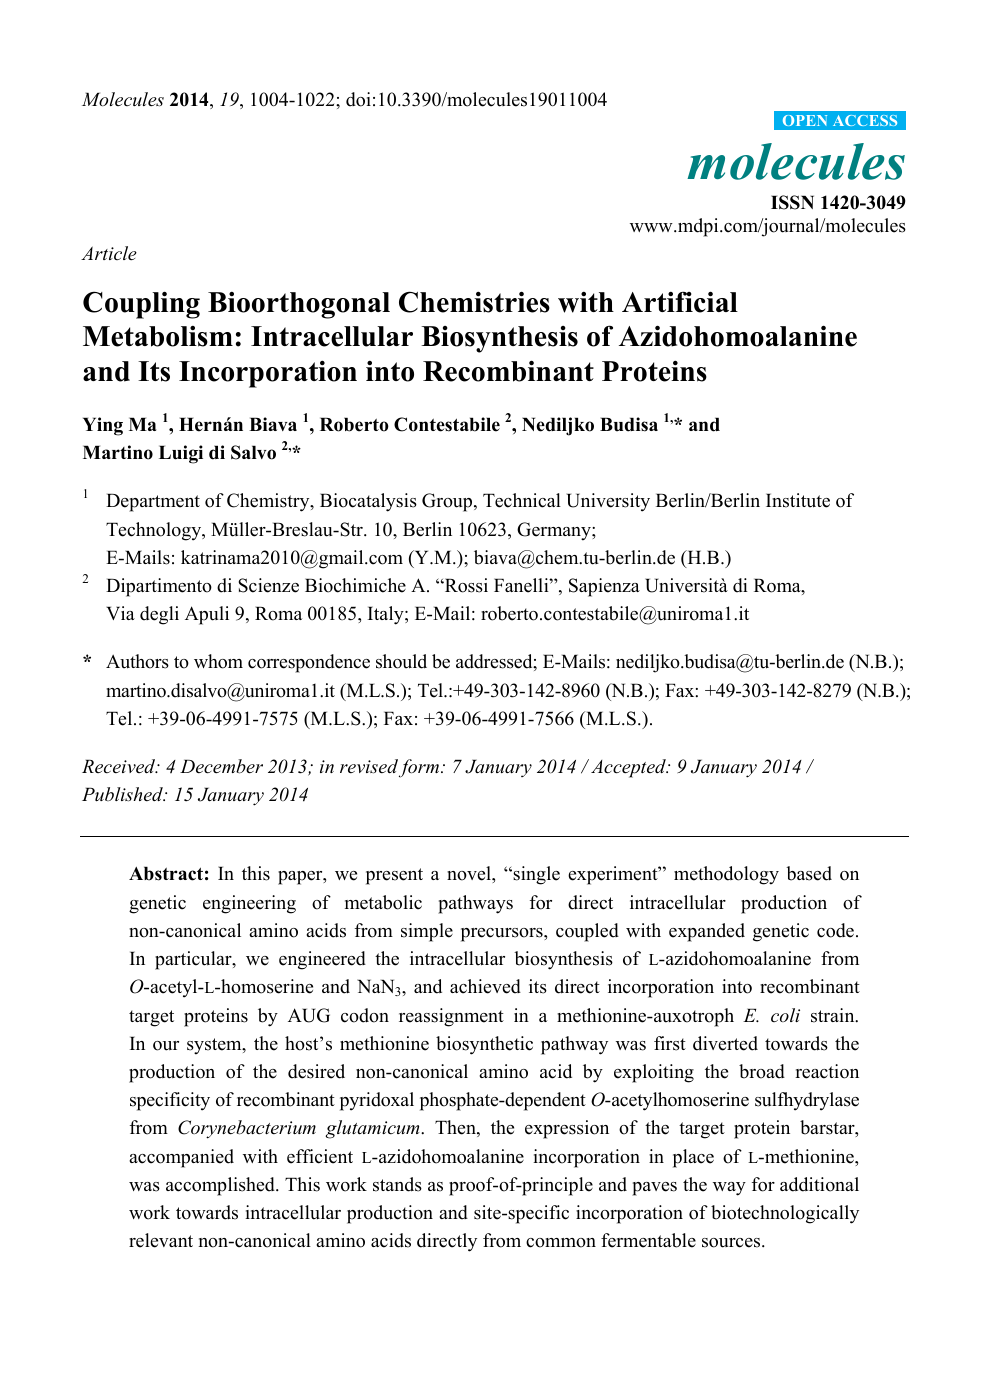 Coupling Bioorthogonal Chemistries With Artificial Metabolism Intracellular Biosynthesis Of Azidohomoalanine And Its Incorporation Into Recombinant Proteins Topic Of Research Paper In Biological Sciences Download Scholarly Article Pdf And Read For Free